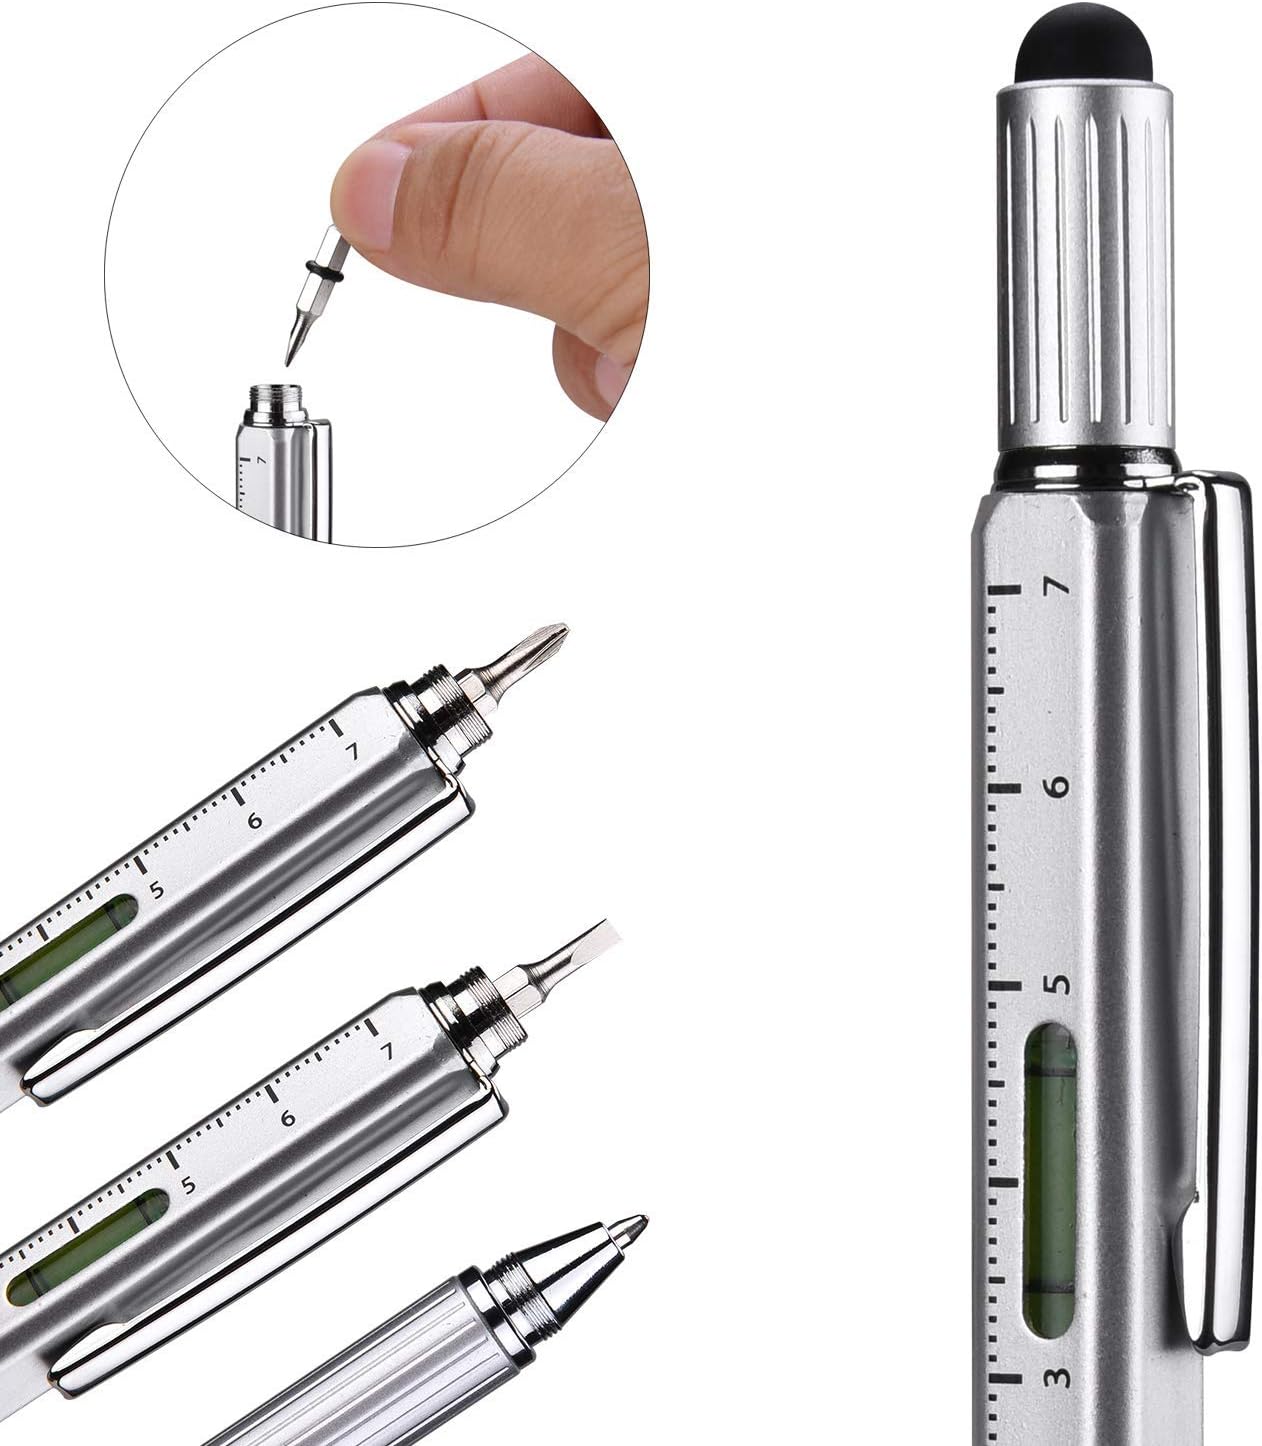 Useful Gadgets Business Gift for men, 6 in 1 Sliver tool pen with Ruler, Level gauge, Ballpoint Pen, Stylus and 2 Screw Drivers, Multifunction Tool Pen Fit for Engineers and Technicians in Gift Box